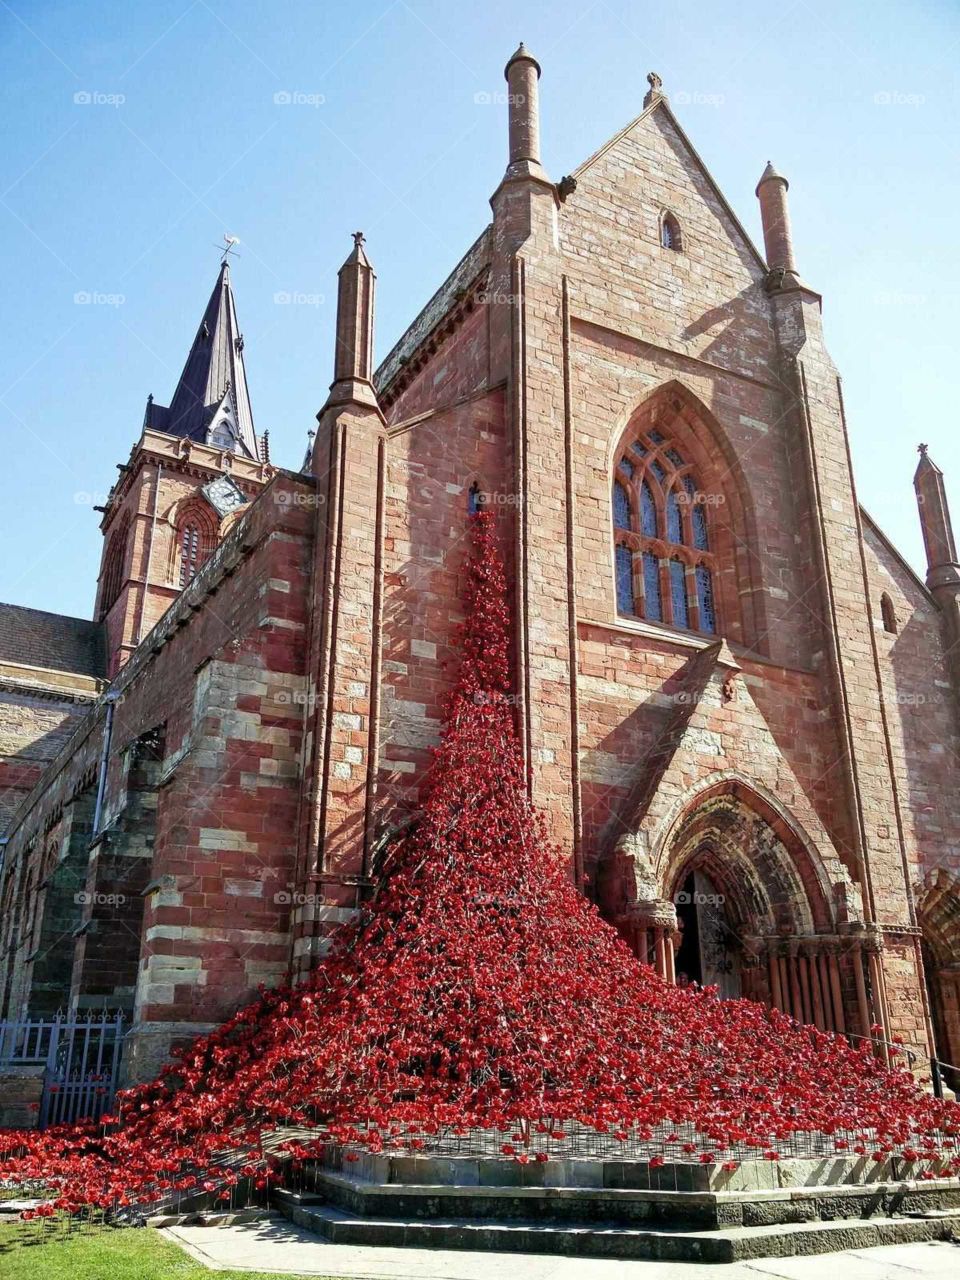 Poppies at St magnus cathedral